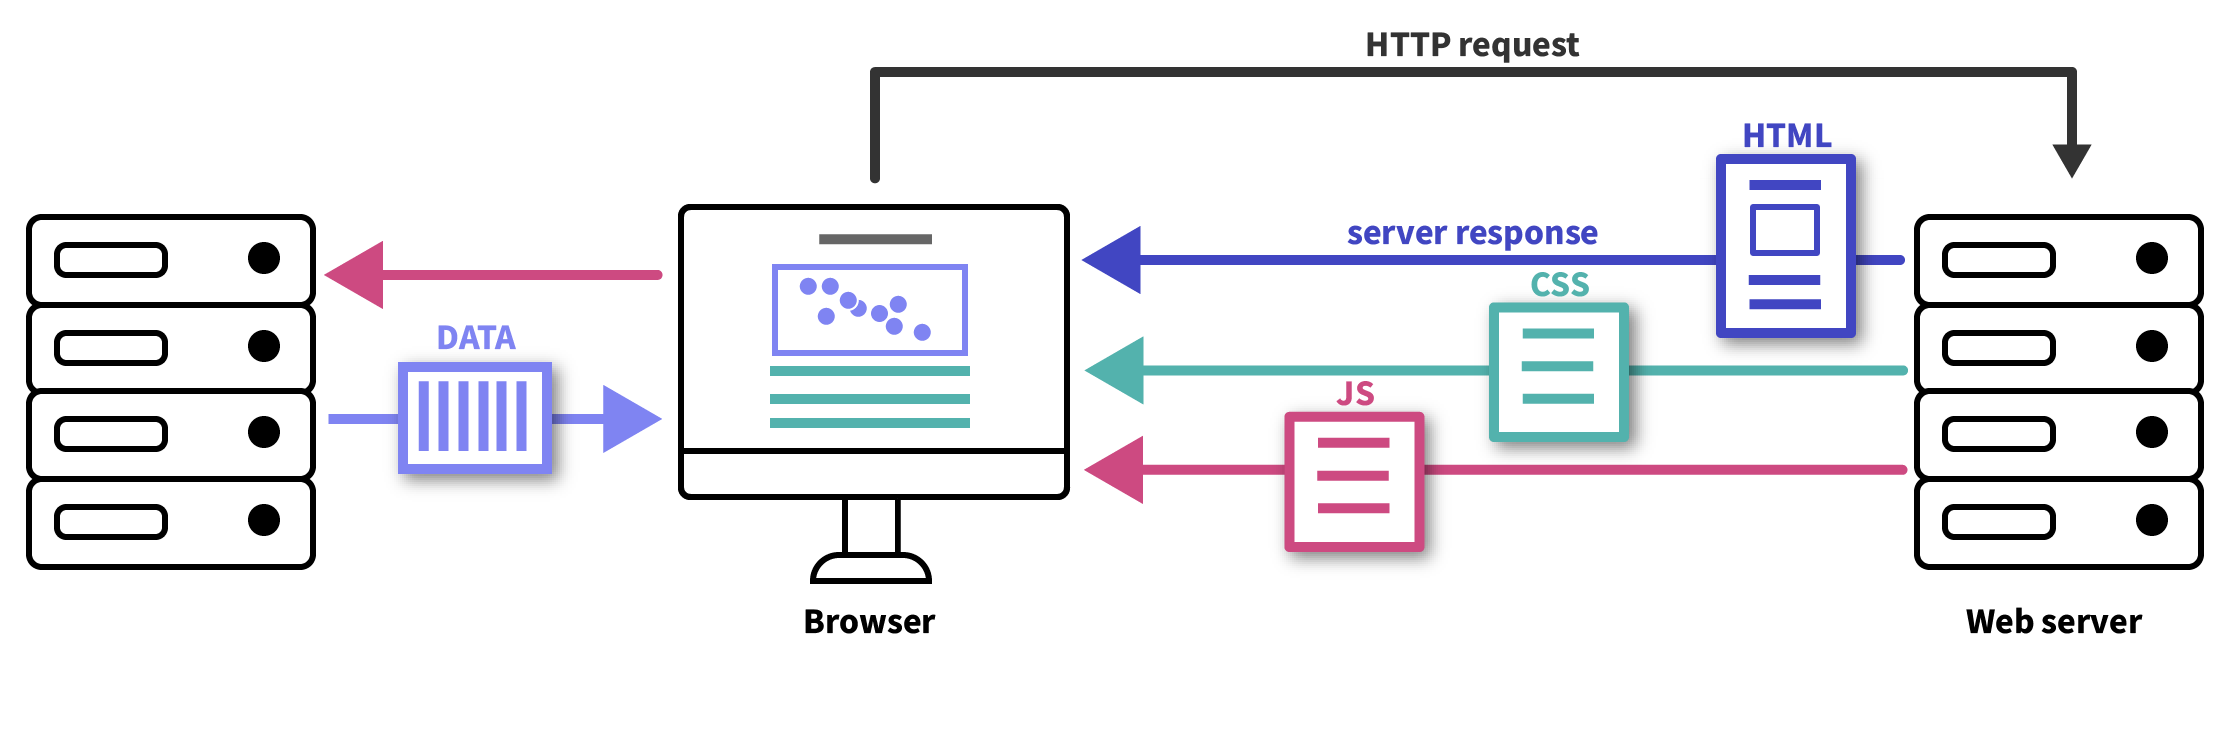 A schematic representation of how a browser sends requests to web servers and receives HTML, JavaScript, CSS and data files in response